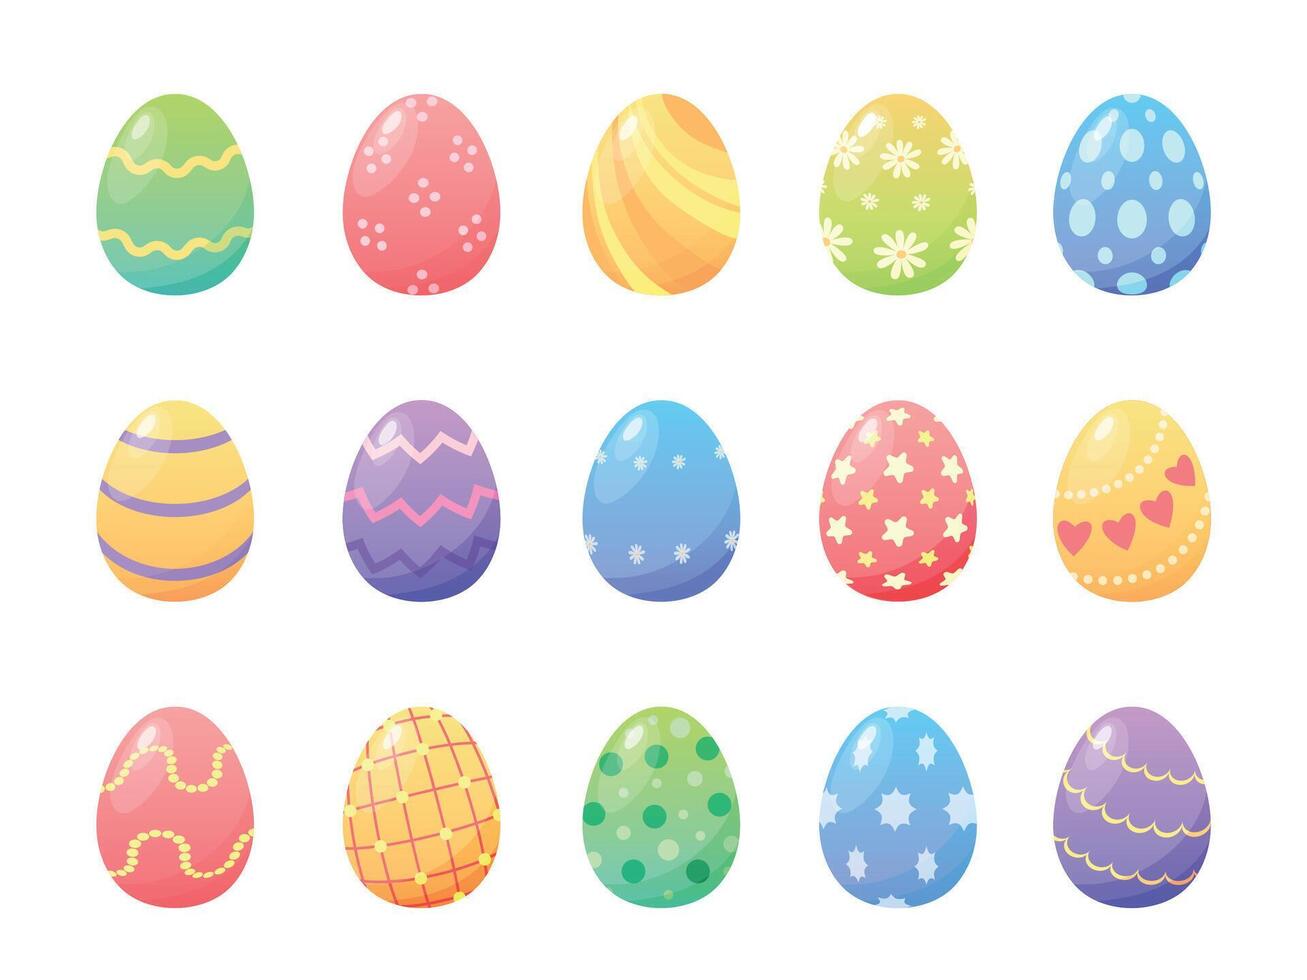 Cartoon colorful easter painted eggs with patterns and textures. Spring holiday decorative elements. Happy Easter day egg hunt vector set